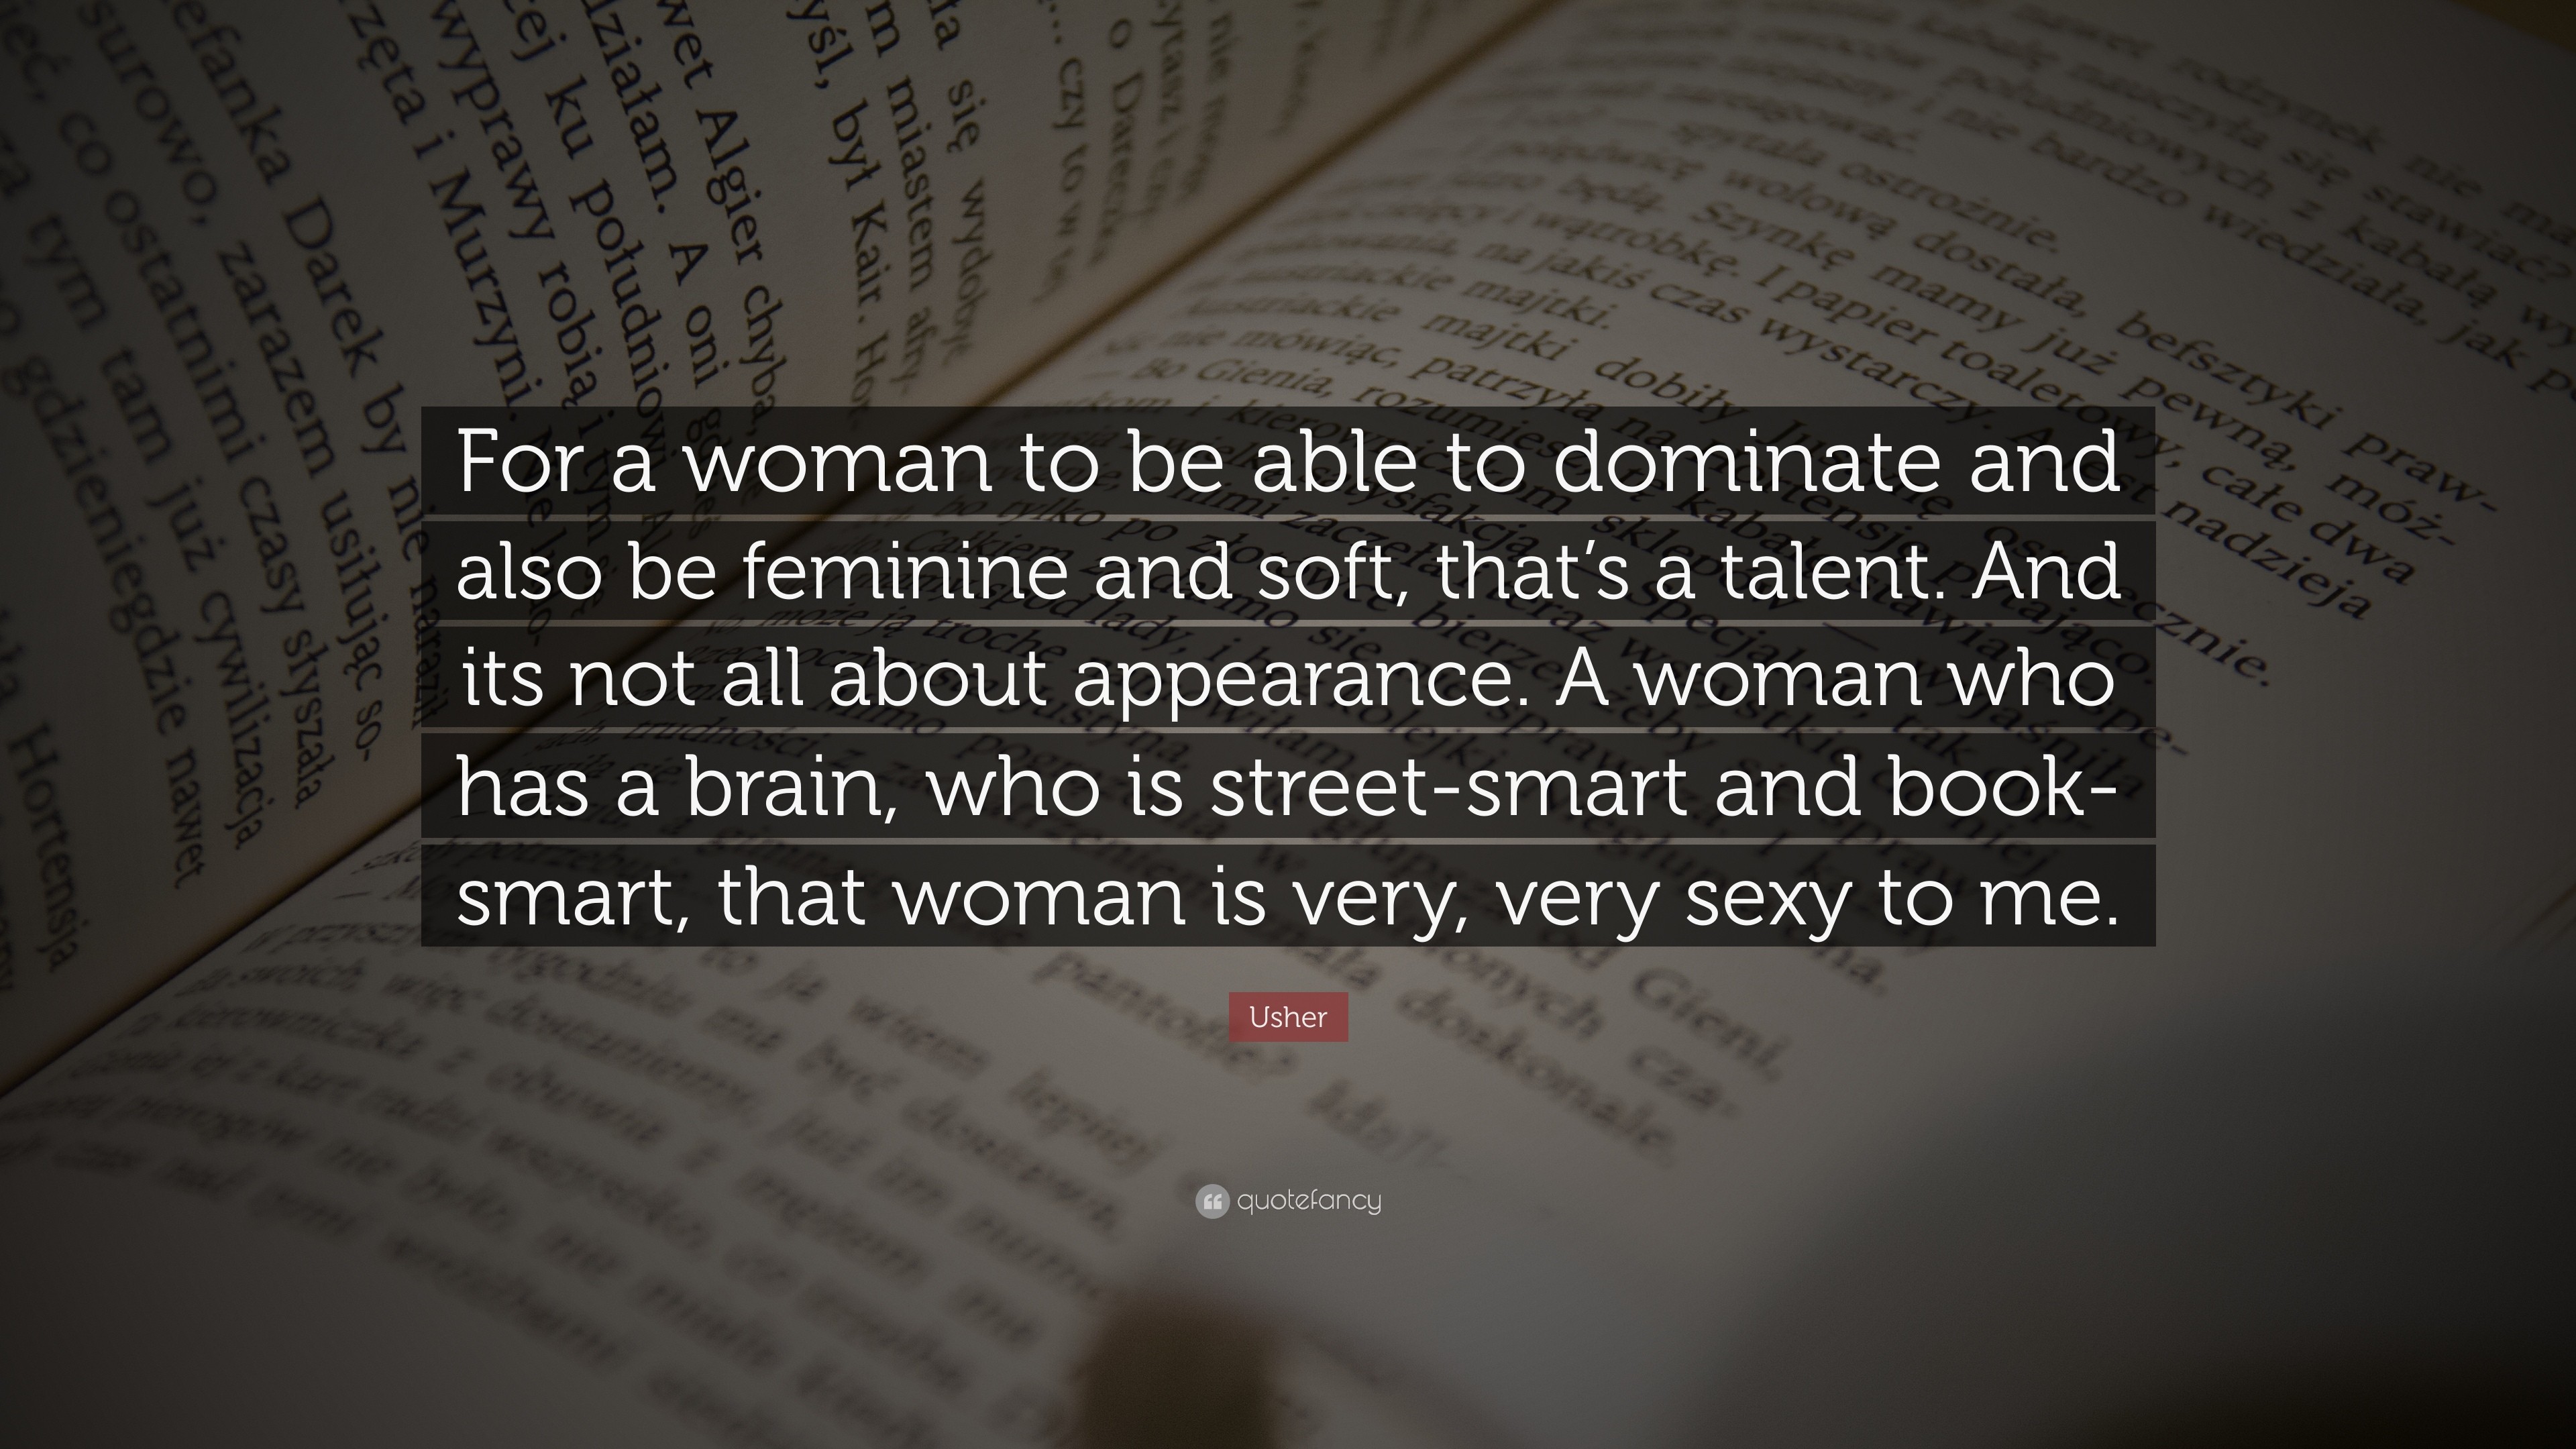 3840x2160 Usher Quote: “For a woman to be able to dominate and also be feminine